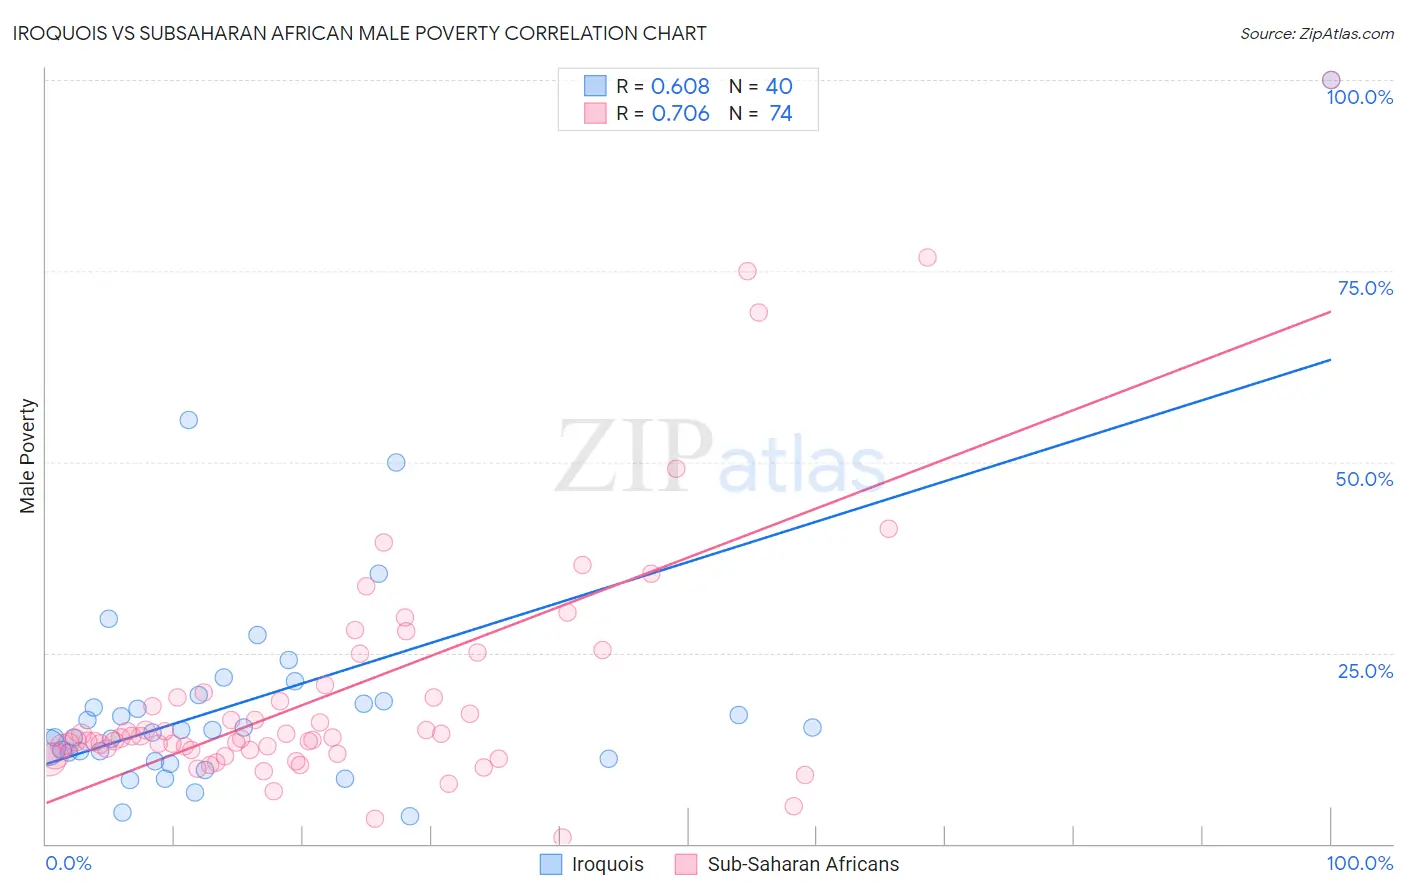 Iroquois vs Subsaharan African Male Poverty